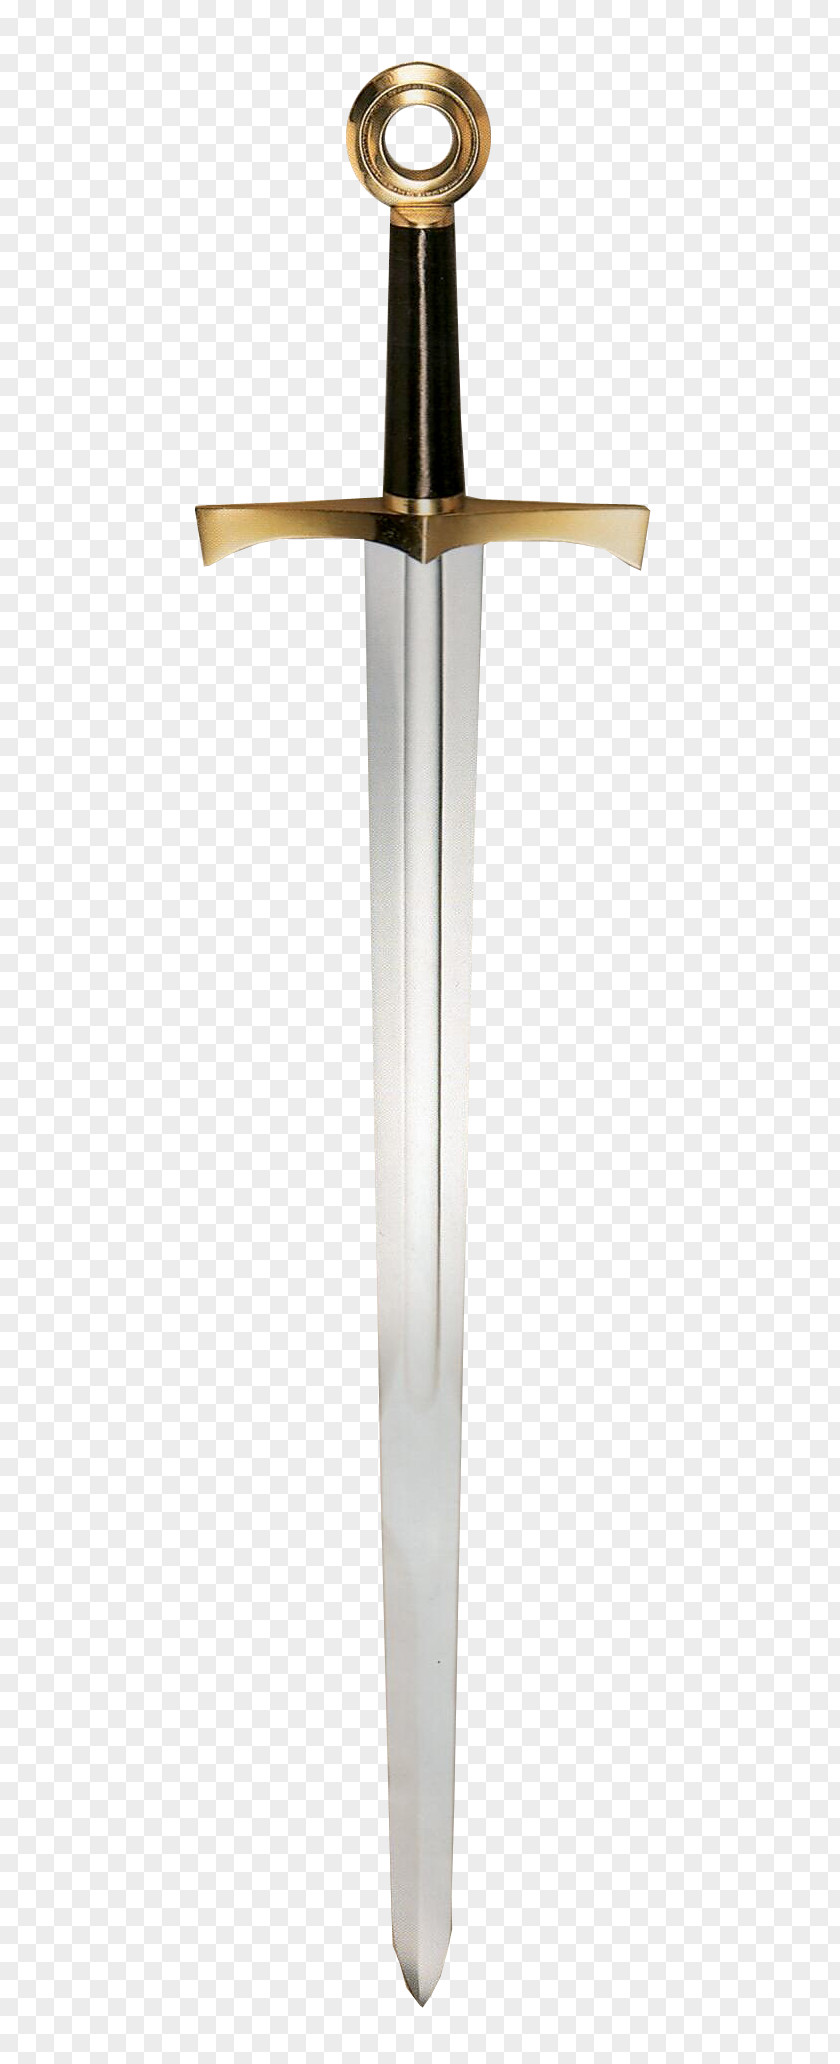 Ancient Sword Knightly PNG